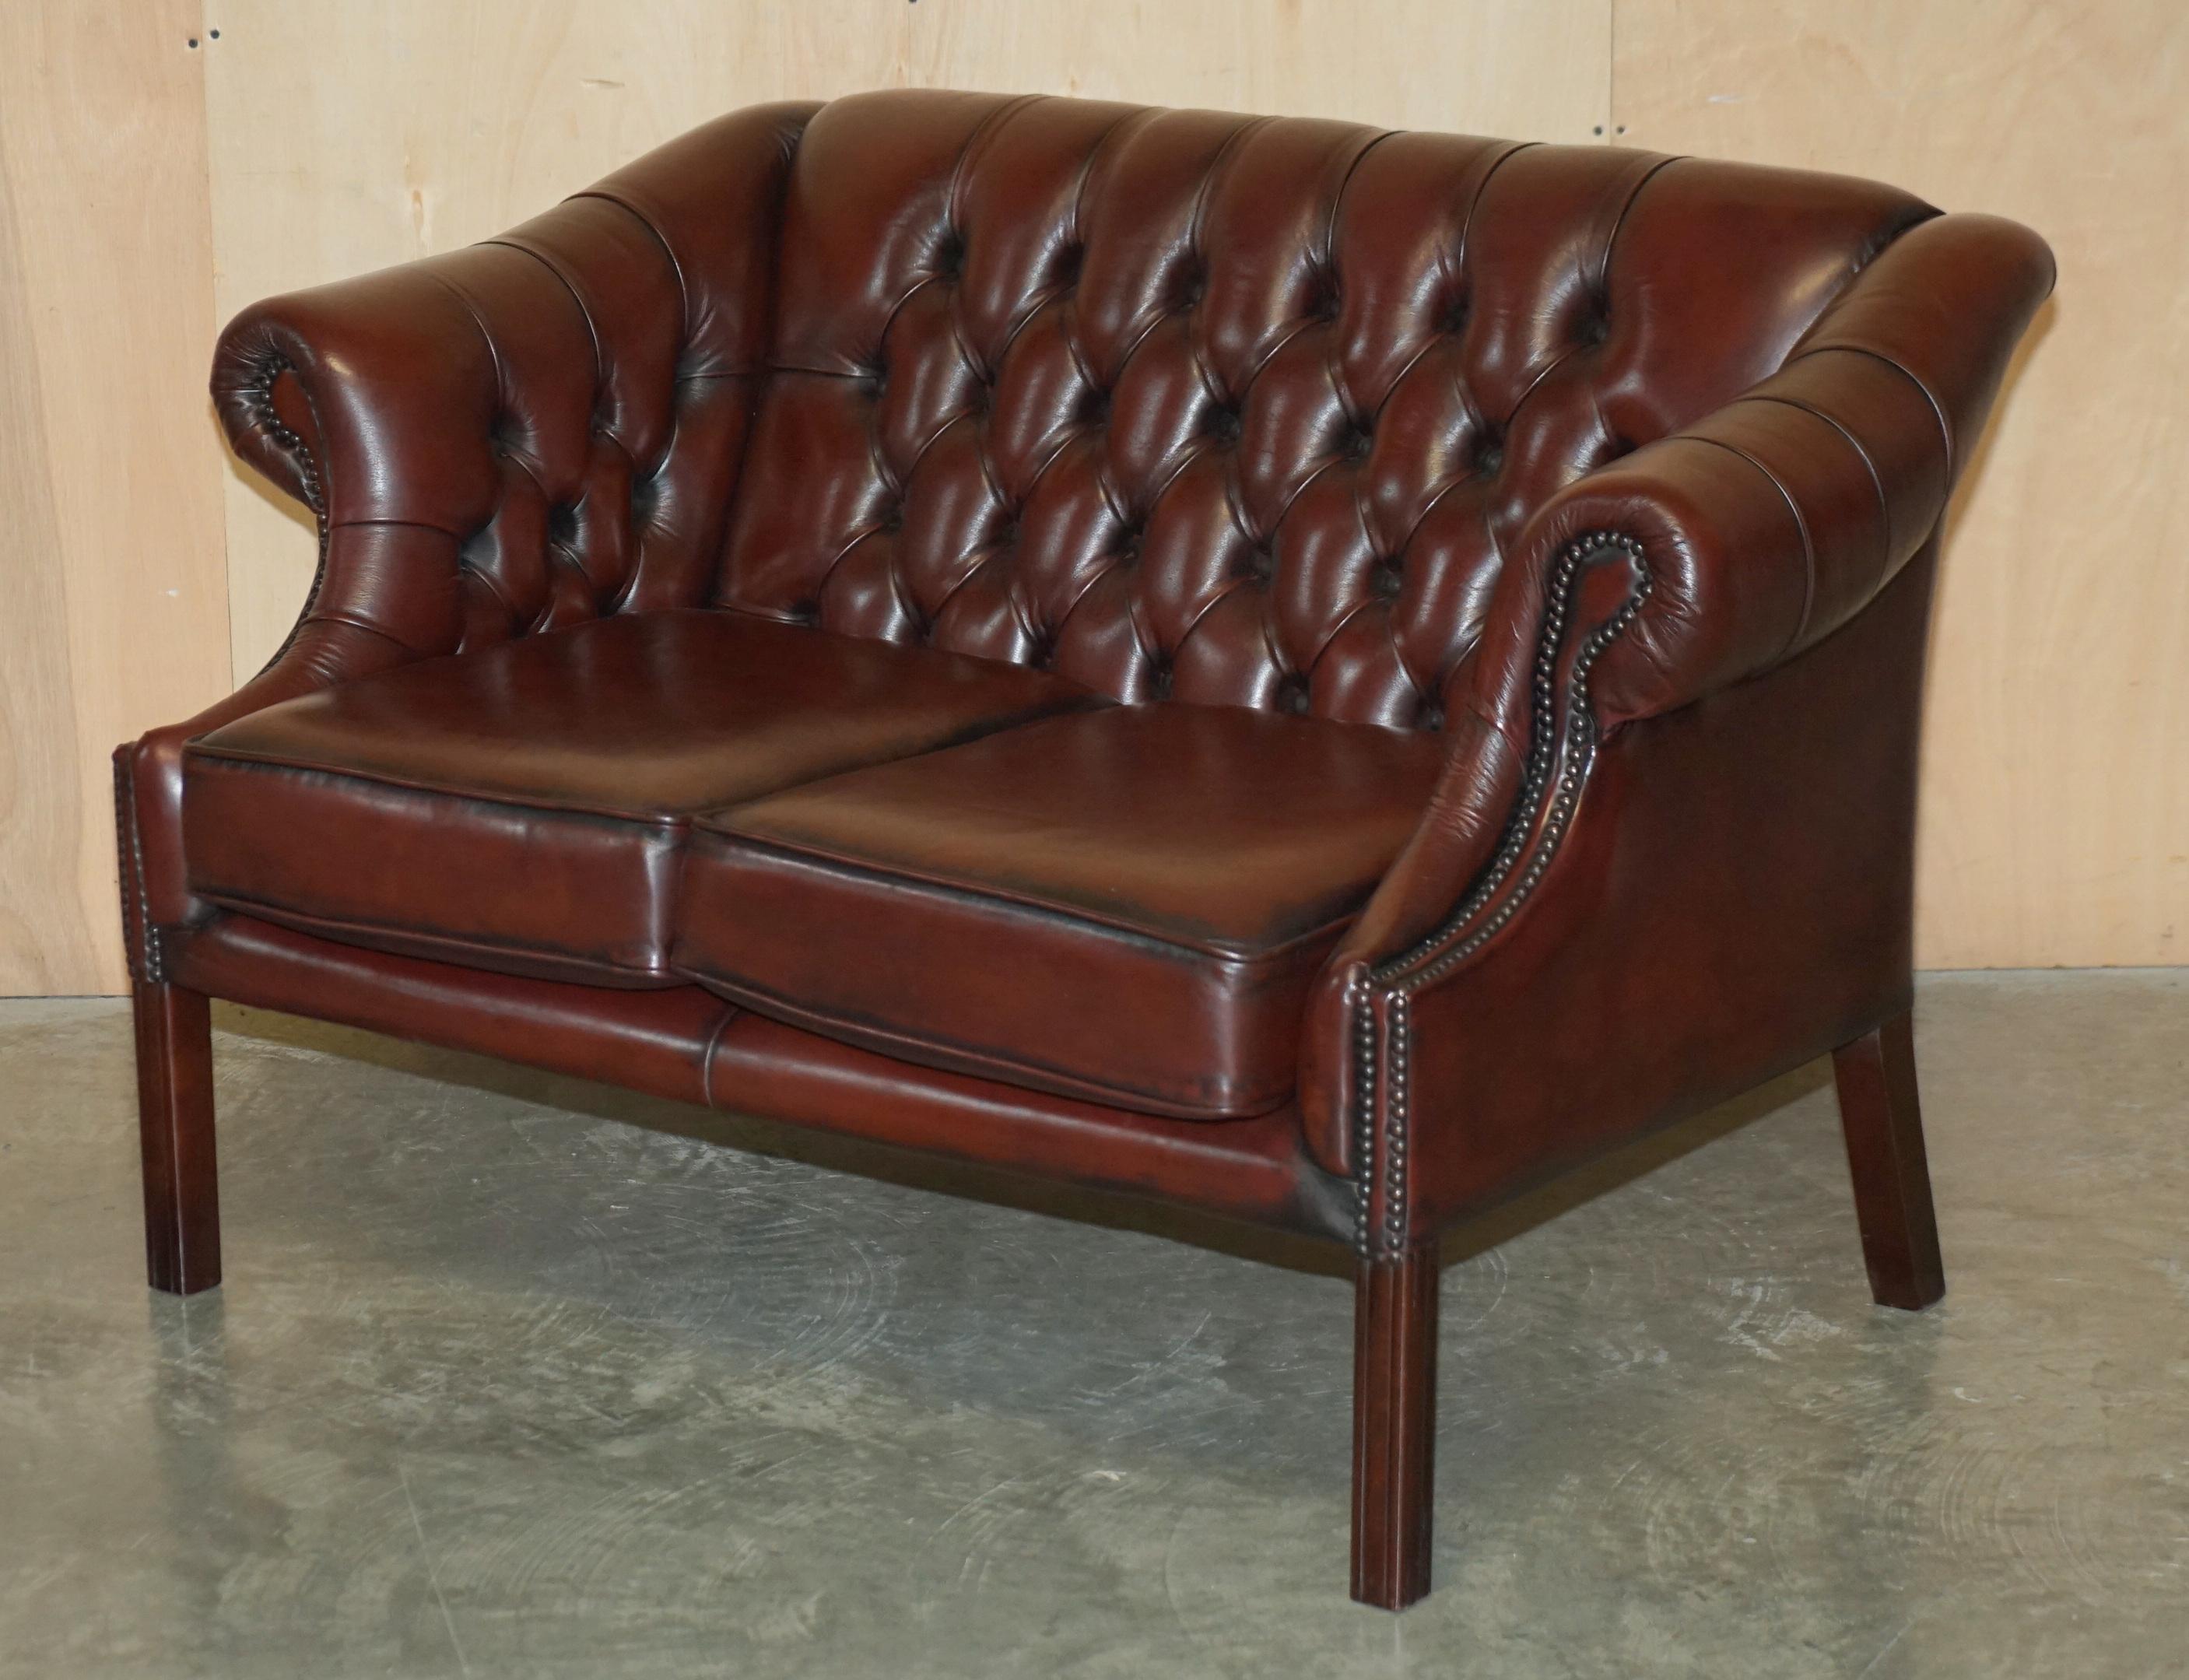 Pair of Harrods London Restored Bordeaux Brown Leather Chesterfield Tufted Sofas For Sale 13